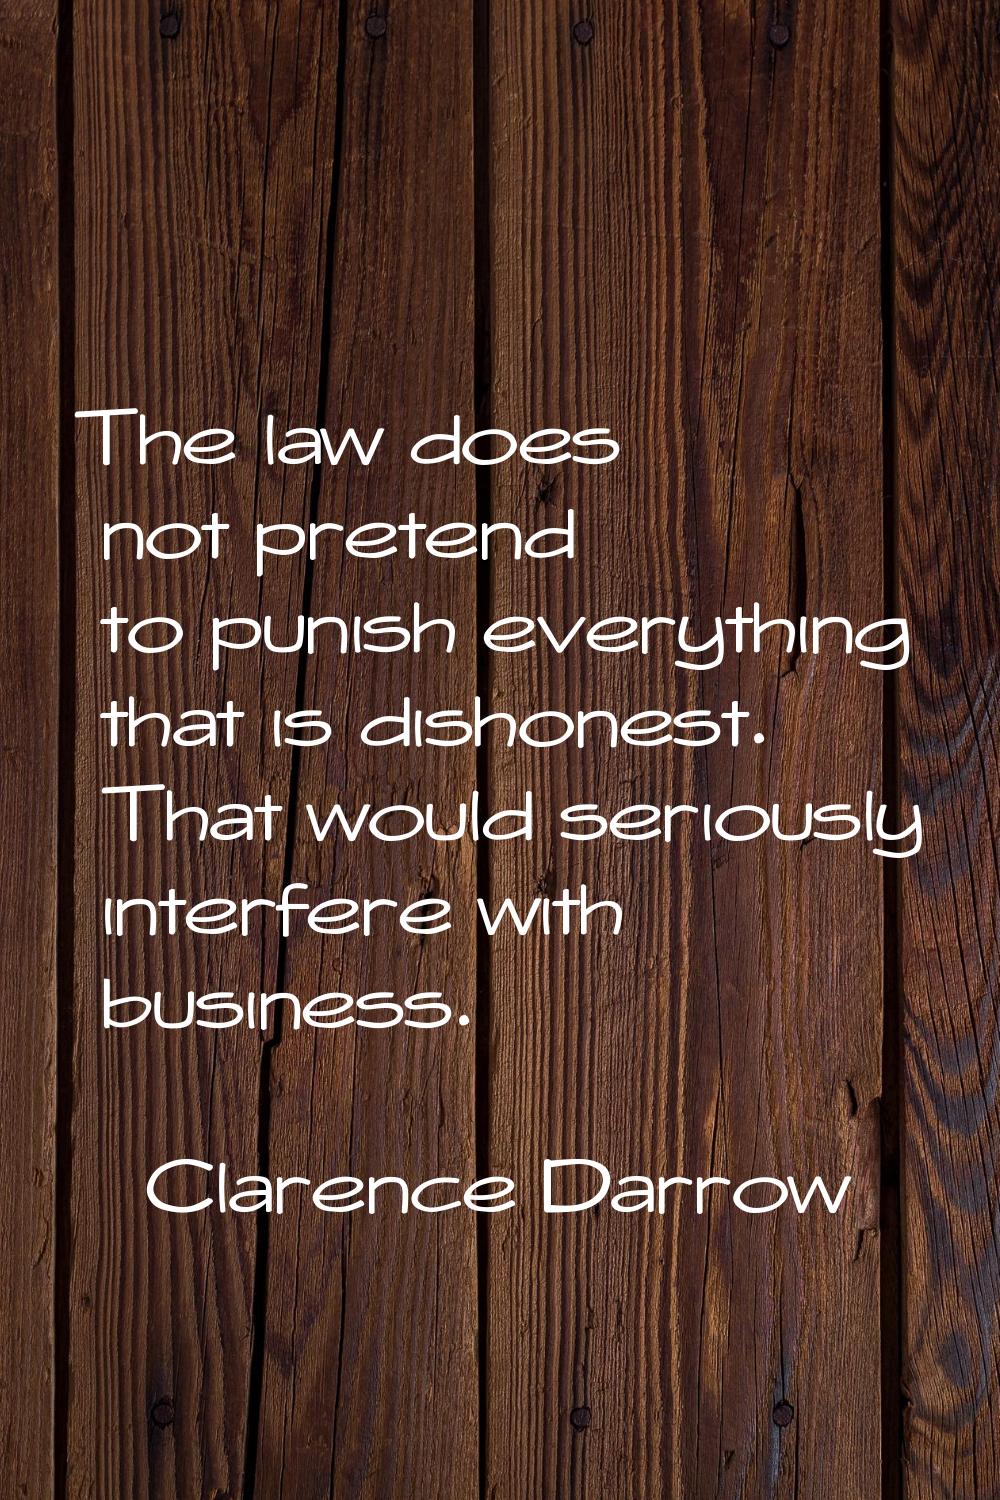 The law does not pretend to punish everything that is dishonest. That would seriously interfere wit